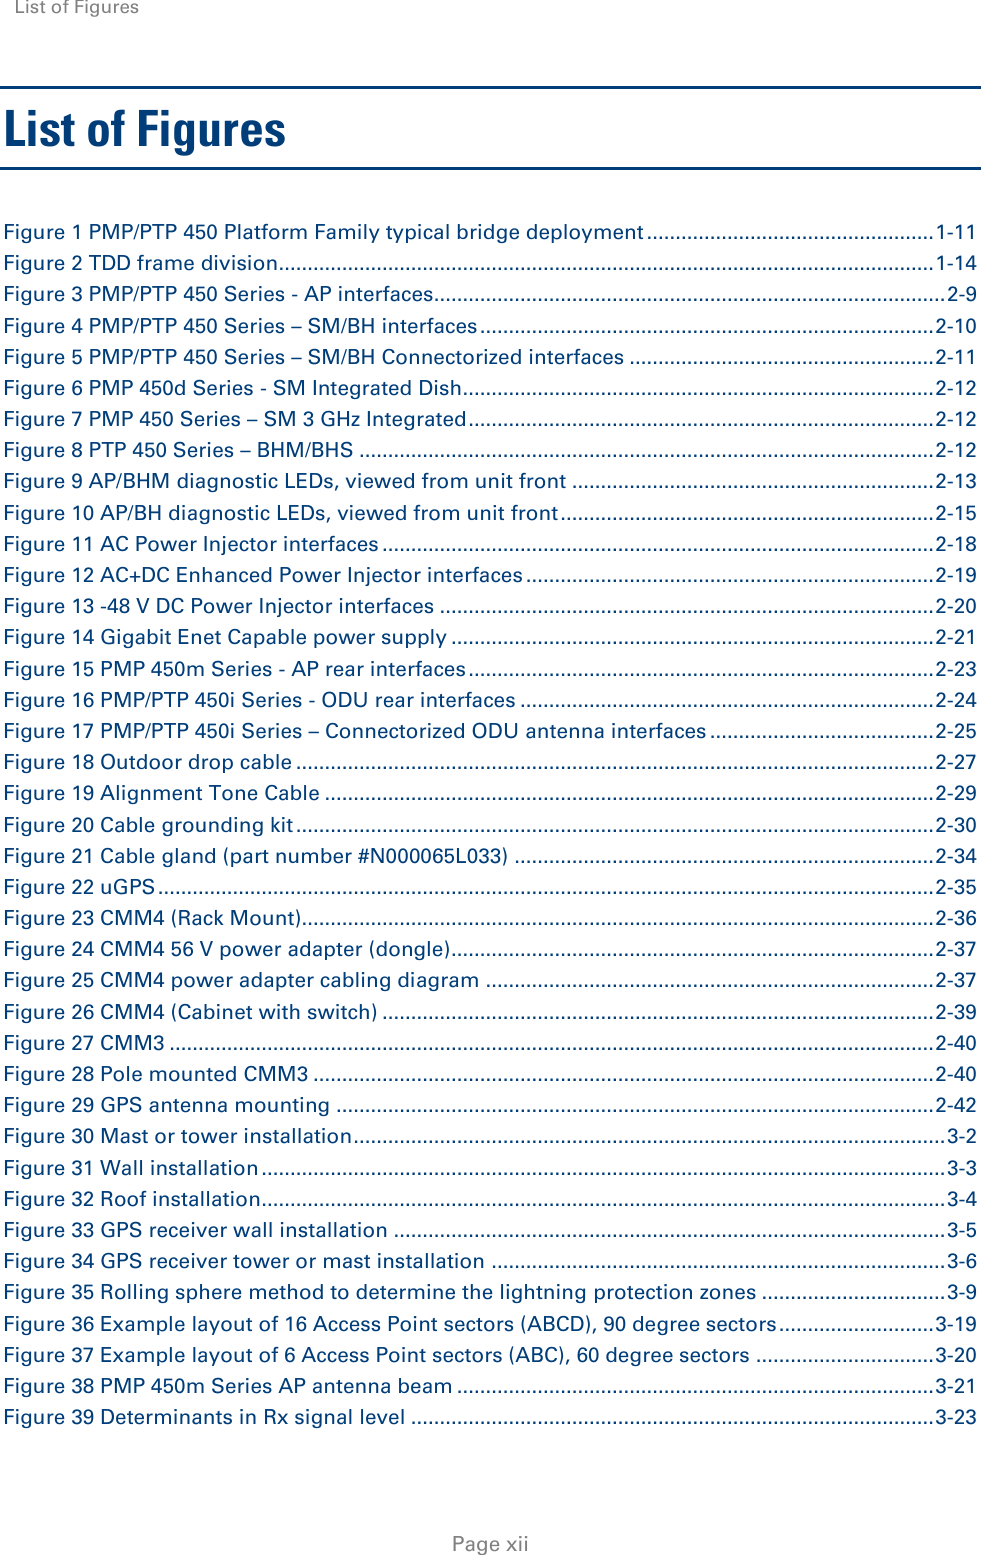 List of Figures    Page xii List of Figures Figure 1 PMP/PTP 450 Platform Family typical bridge deployment .................................................. 1-11 Figure 2 TDD frame division.................................................................................................................. 1-14 Figure 3 PMP/PTP 450 Series - AP interfaces......................................................................................... 2-9 Figure 4 PMP/PTP 450 Series – SM/BH interfaces ............................................................................... 2-10 Figure 5 PMP/PTP 450 Series – SM/BH Connectorized interfaces ..................................................... 2-11 Figure 6 PMP 450d Series - SM Integrated Dish.................................................................................. 2-12 Figure 7 PMP 450 Series – SM 3 GHz Integrated ................................................................................. 2-12 Figure 8 PTP 450 Series – BHM/BHS .................................................................................................... 2-12 Figure 9 AP/BHM diagnostic LEDs, viewed from unit front ............................................................... 2-13 Figure 10 AP/BH diagnostic LEDs, viewed from unit front ................................................................. 2-15 Figure 11 AC Power Injector interfaces ................................................................................................ 2-18 Figure 12 AC+DC Enhanced Power Injector interfaces ....................................................................... 2-19 Figure 13 -48 V DC Power Injector interfaces ...................................................................................... 2-20 Figure 14 Gigabit Enet Capable power supply .................................................................................... 2-21 Figure 15 PMP 450m Series - AP rear interfaces ................................................................................. 2-23 Figure 16 PMP/PTP 450i Series - ODU rear interfaces ........................................................................ 2-24 Figure 17 PMP/PTP 450i Series – Connectorized ODU antenna interfaces ....................................... 2-25 Figure 18 Outdoor drop cable ............................................................................................................... 2-27 Figure 19 Alignment Tone Cable .......................................................................................................... 2-29 Figure 20 Cable grounding kit ............................................................................................................... 2-30 Figure 21 Cable gland (part number #N000065L033) ......................................................................... 2-34 Figure 22 uGPS ....................................................................................................................................... 2-35 Figure 23 CMM4 (Rack Mount).............................................................................................................. 2-36 Figure 24 CMM4 56 V power adapter (dongle).................................................................................... 2-37 Figure 25 CMM4 power adapter cabling diagram .............................................................................. 2-37 Figure 26 CMM4 (Cabinet with switch) ................................................................................................ 2-39 Figure 27 CMM3 ..................................................................................................................................... 2-40 Figure 28 Pole mounted CMM3 ............................................................................................................ 2-40 Figure 29 GPS antenna mounting ........................................................................................................ 2-42 Figure 30 Mast or tower installation ....................................................................................................... 3-2 Figure 31 Wall installation ....................................................................................................................... 3-3 Figure 32 Roof installation....................................................................................................................... 3-4 Figure 33 GPS receiver wall installation ................................................................................................ 3-5 Figure 34 GPS receiver tower or mast installation ............................................................................... 3-6 Figure 35 Rolling sphere method to determine the lightning protection zones ................................ 3-9 Figure 36 Example layout of 16 Access Point sectors (ABCD), 90 degree sectors ........................... 3-19 Figure 37 Example layout of 6 Access Point sectors (ABC), 60 degree sectors ............................... 3-20 Figure 38 PMP 450m Series AP antenna beam ................................................................................... 3-21 Figure 39 Determinants in Rx signal level ........................................................................................... 3-23 